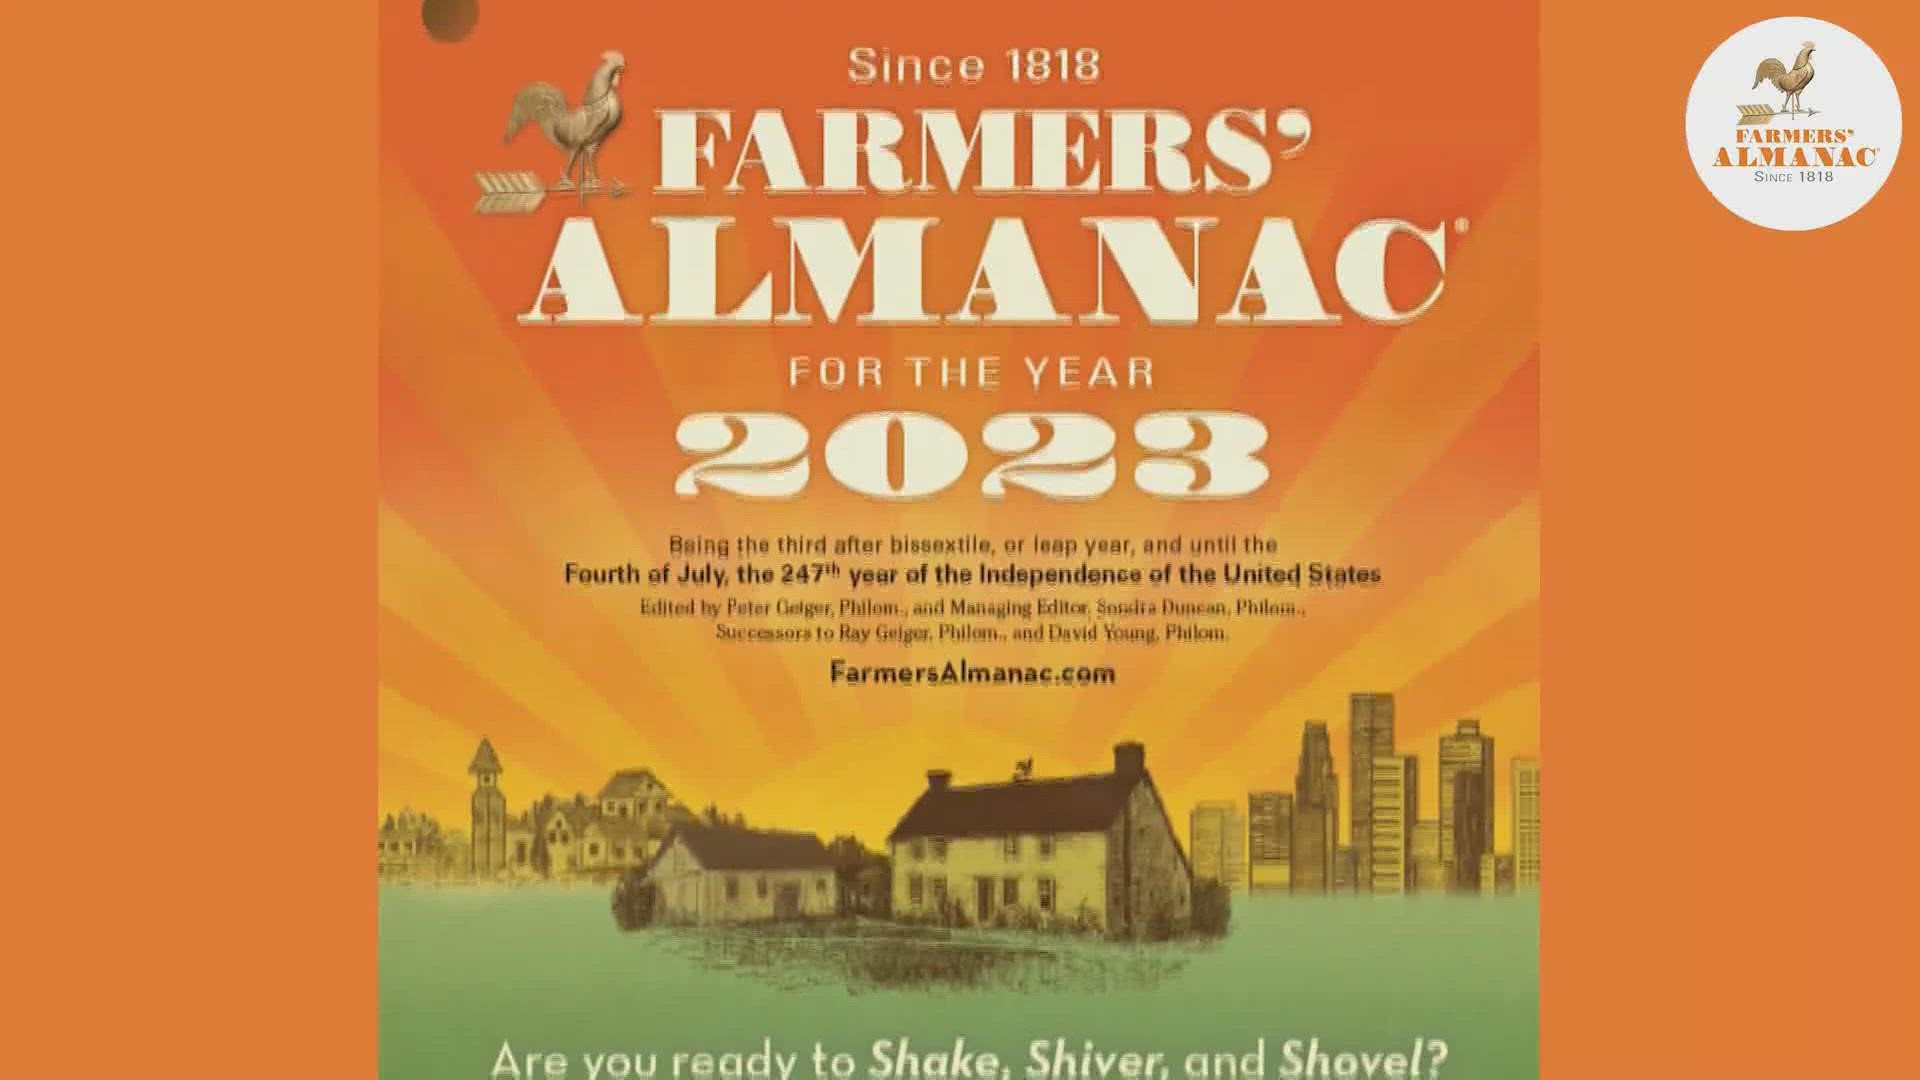 Meteorologists have long questioned the predictions behind the Farmers' Almanac.